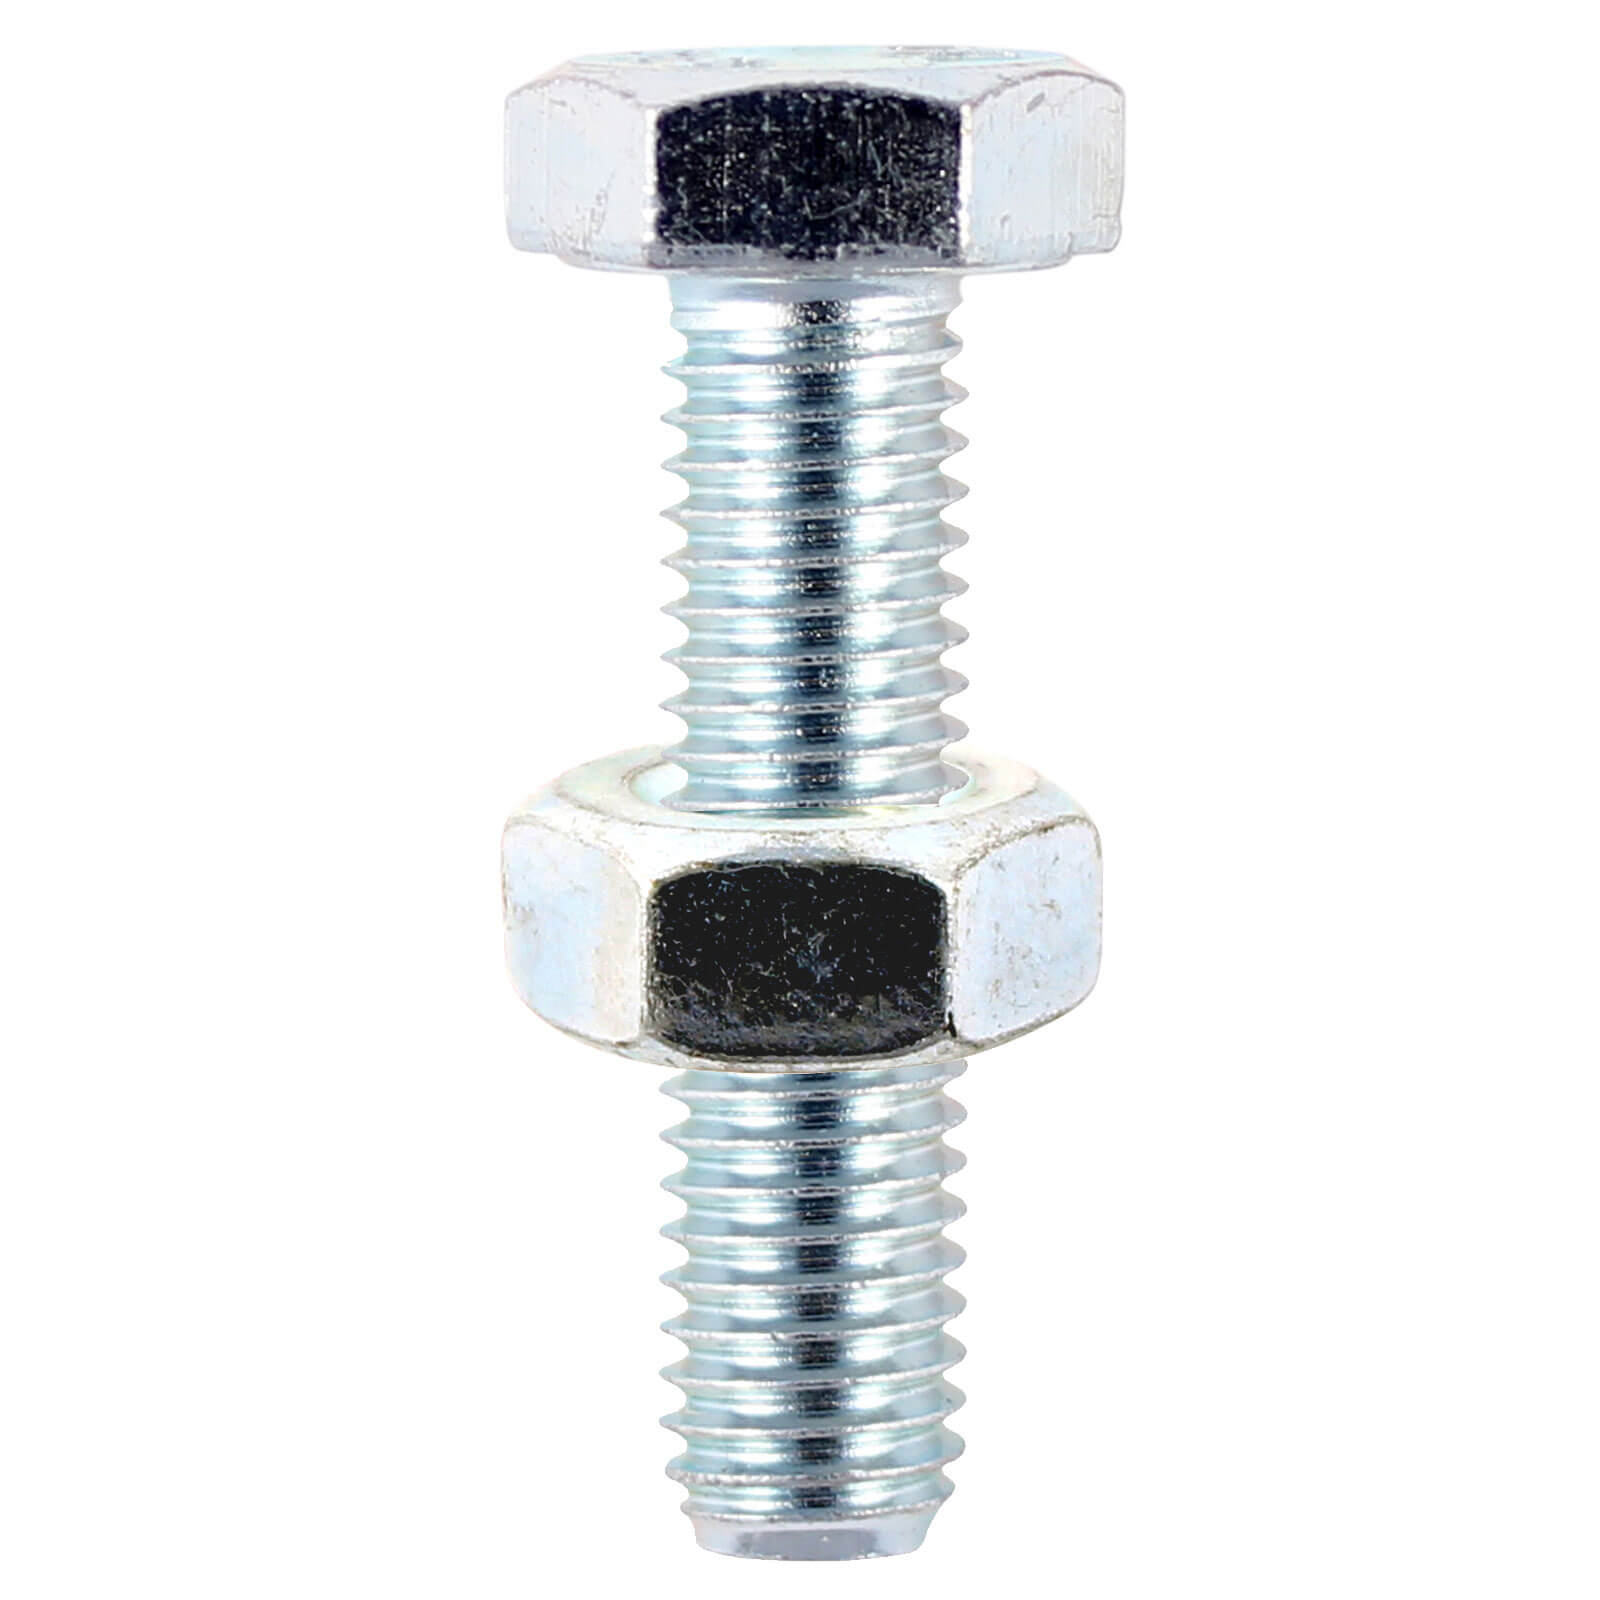 Hexagon Set Screw and Nuts Stainless Steel M10 25mm Pack of 2